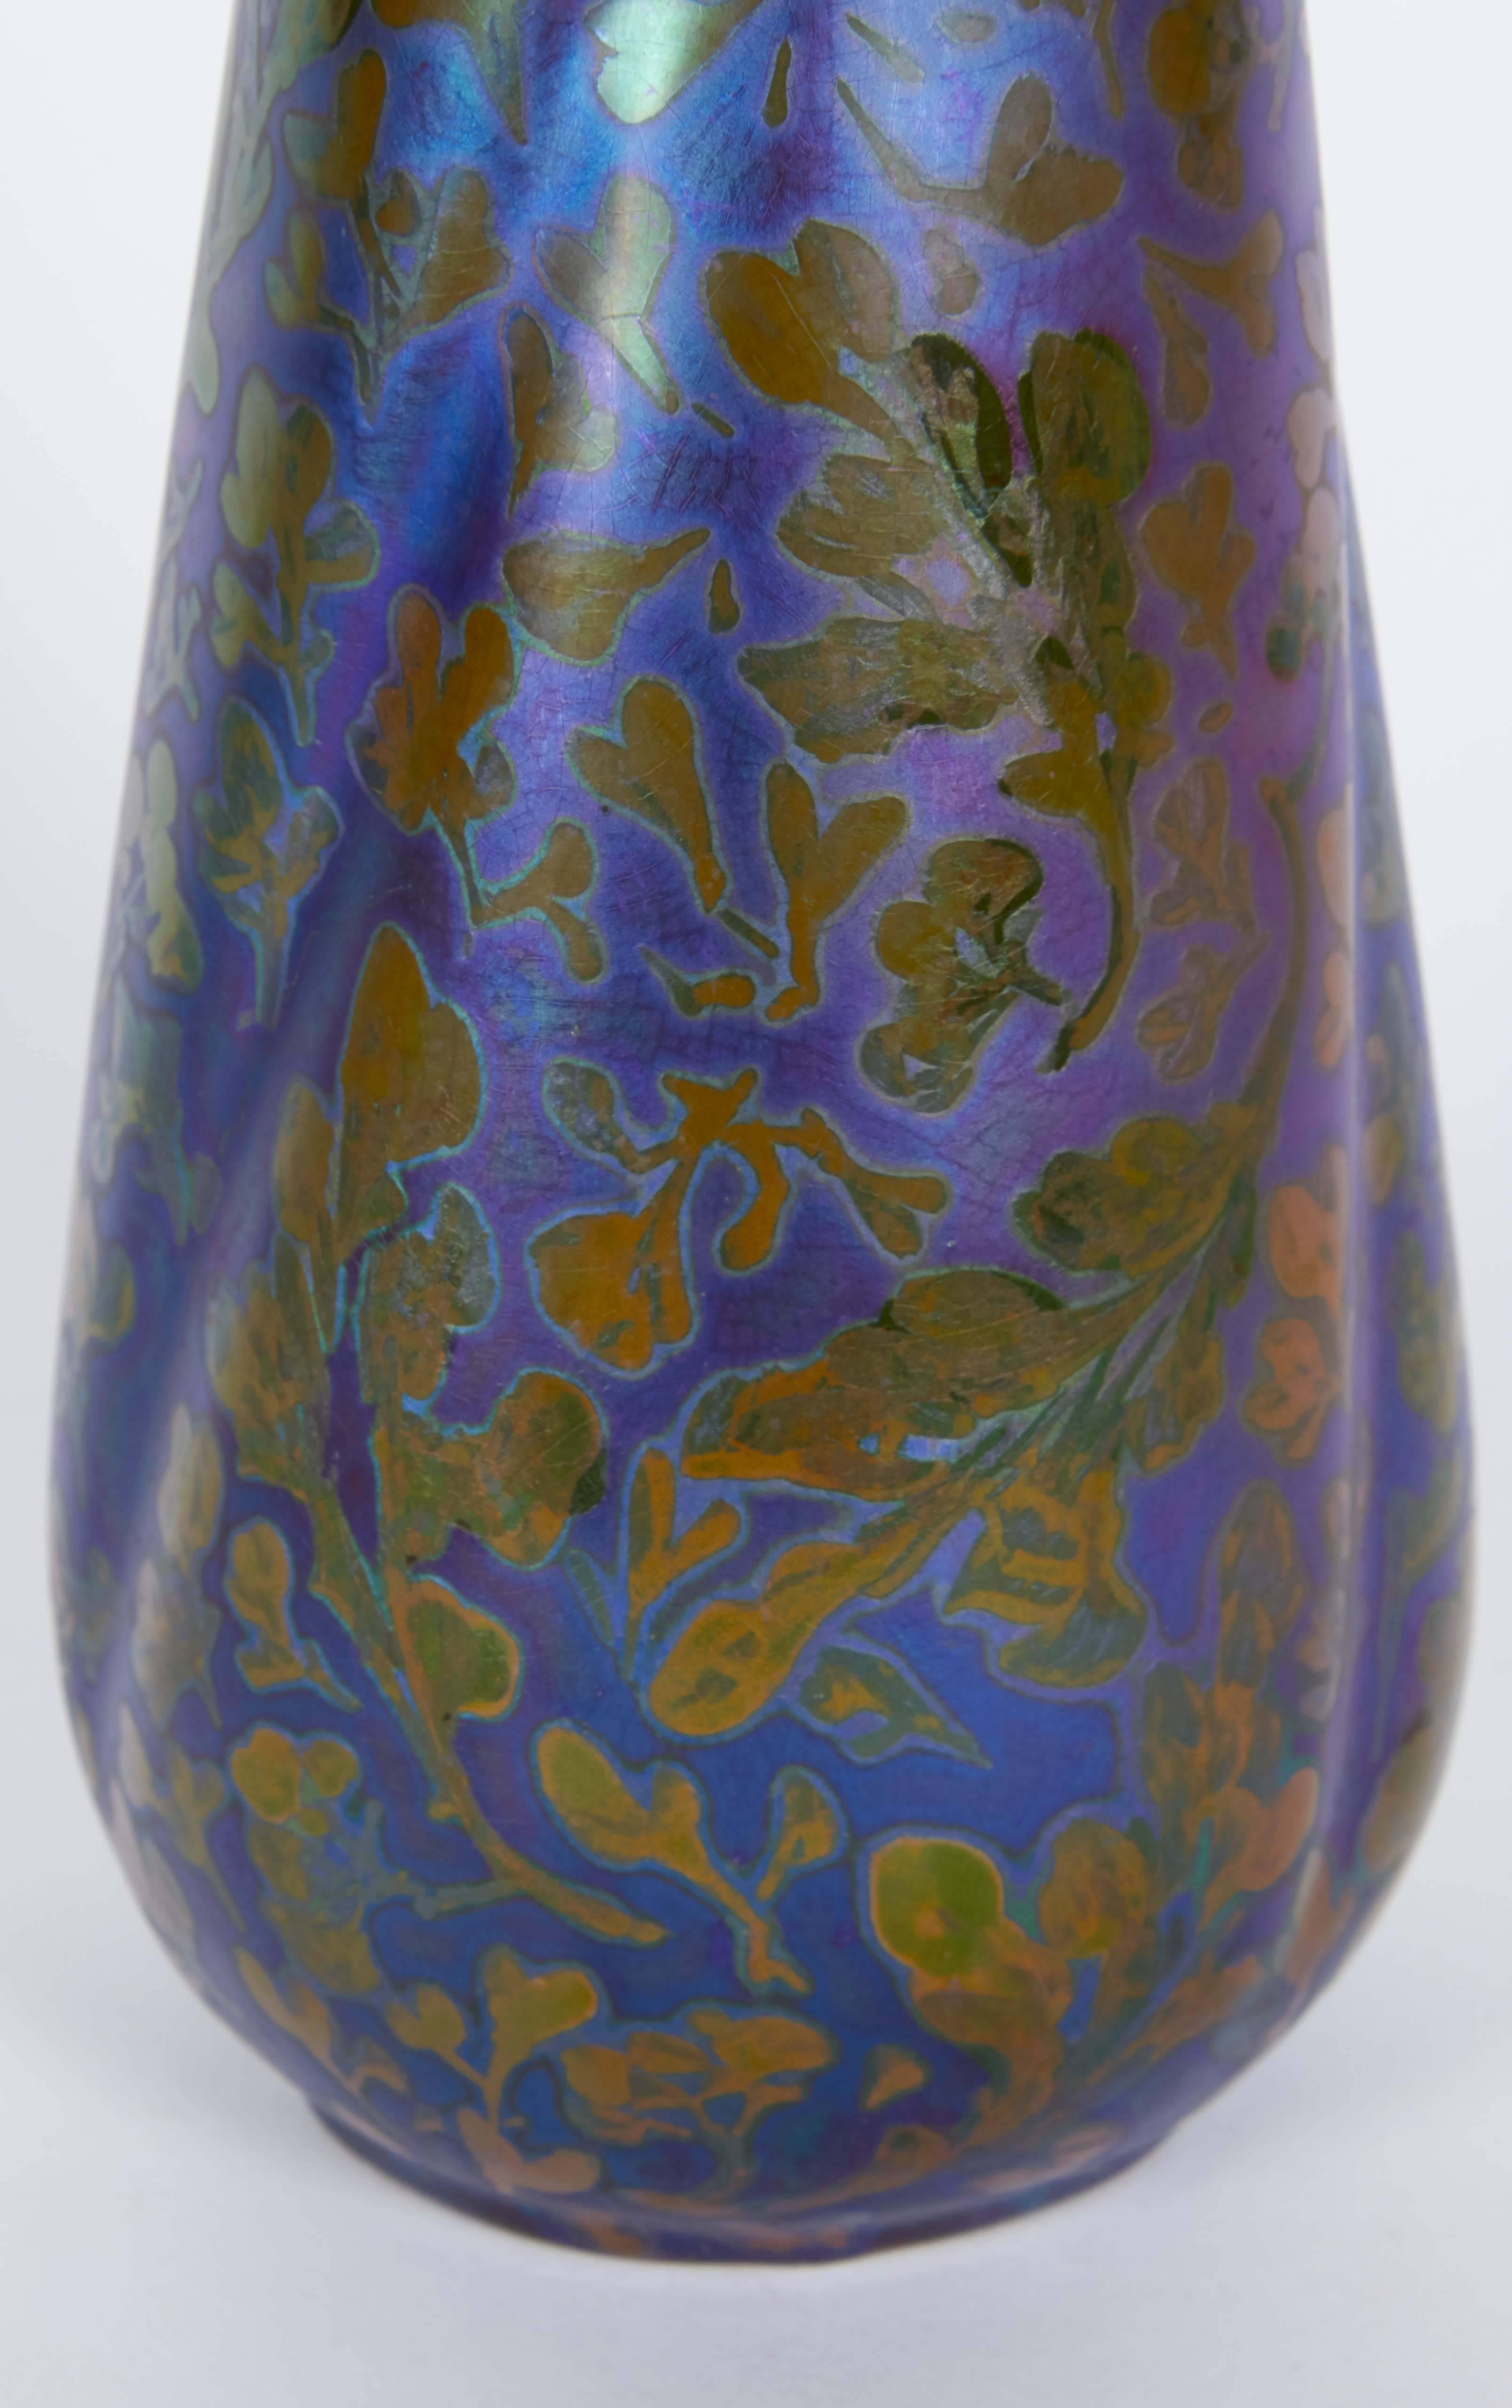 A striking Art Nouveau pottery vase by French ceramicist Jacques Sicard for Weller Pottery, depicting scrolling foliage, with iridescent luster glaze. Markings include signature [Sicard] to the base, underside numbered. This piece remains in very